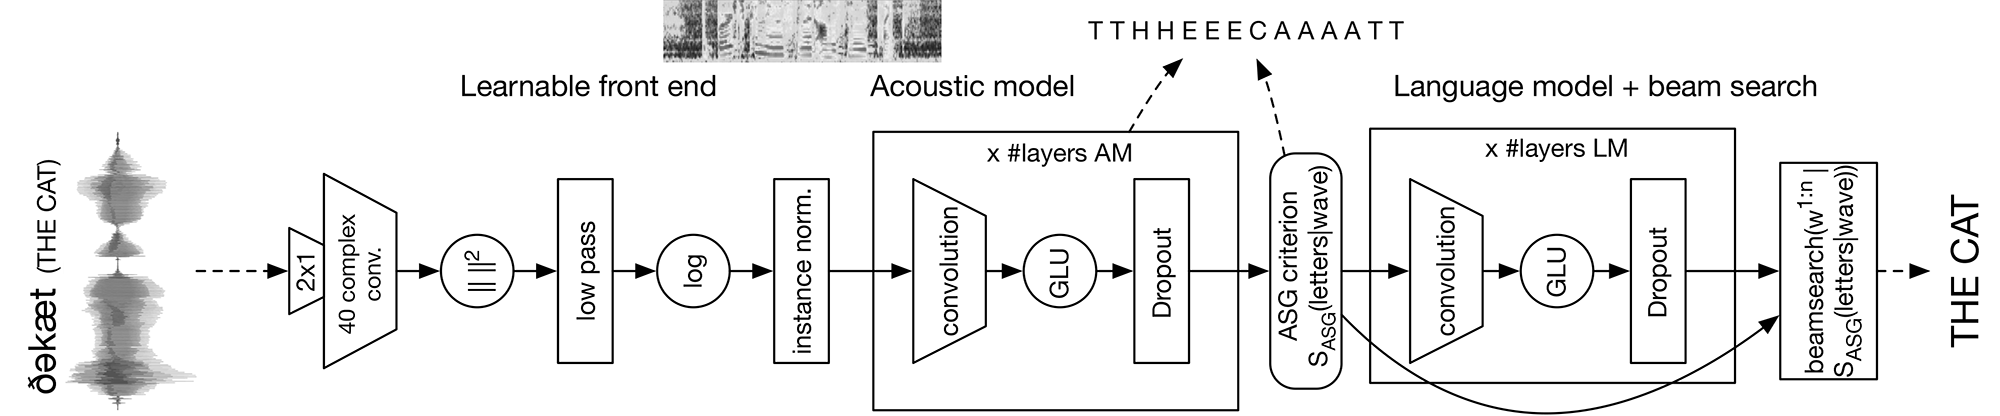 Facebook AI Research (FAIR) Speech is sharing the first fully convolutional speech recognition system. From the waveform to the final word transcription, the learnable parts of the system are composed only of convolutional layers. This yields performance that's competitive with recurrent architectures.